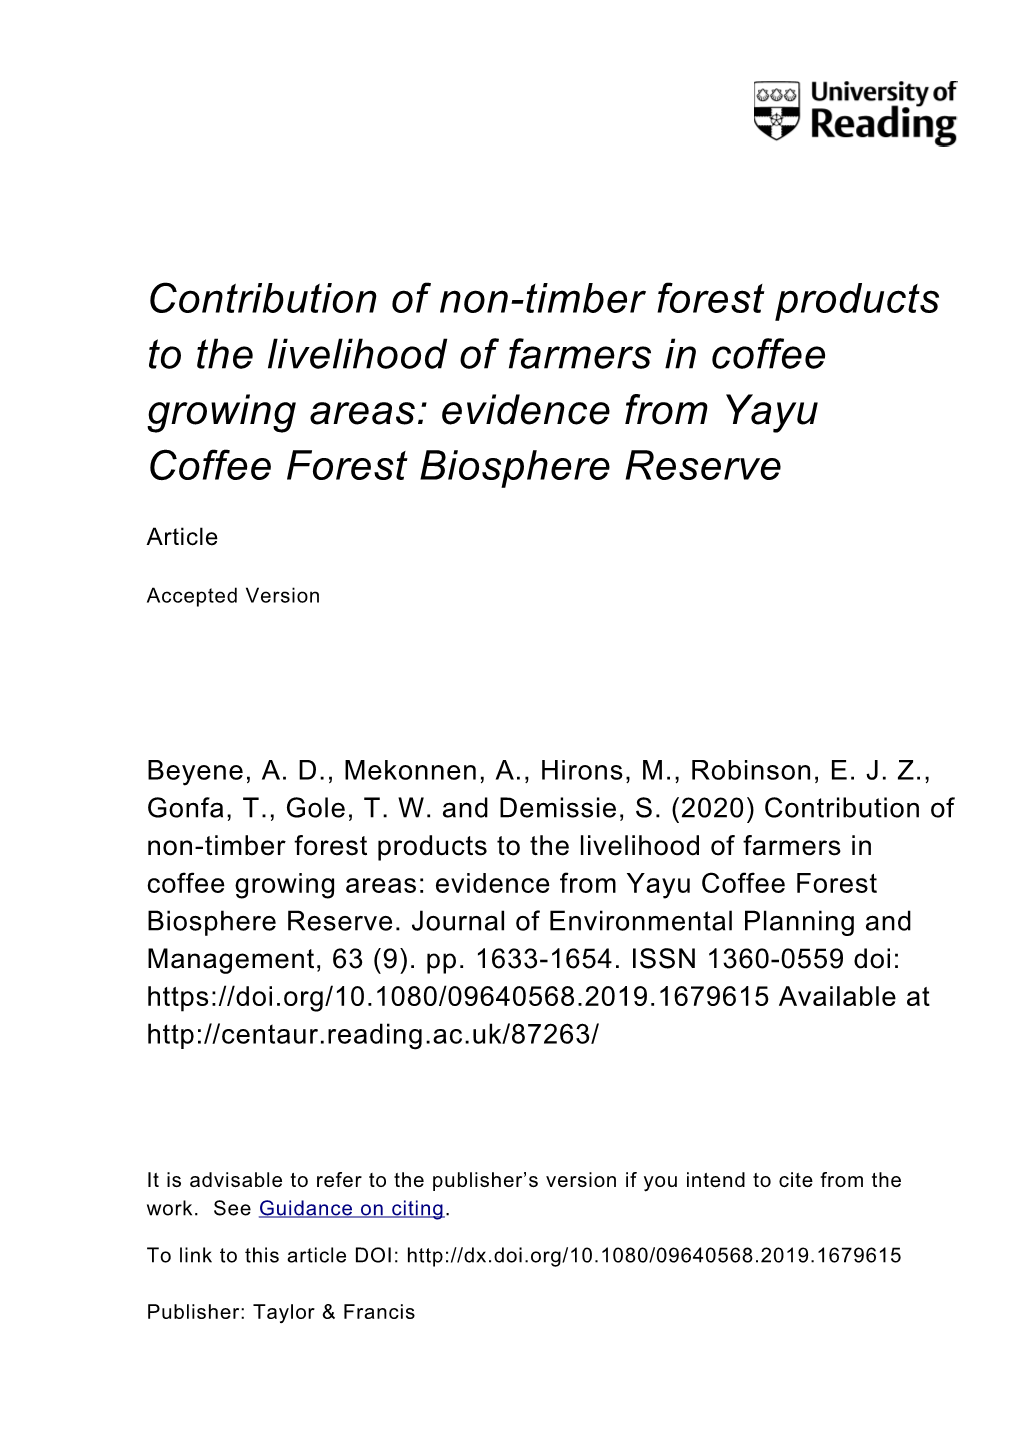 Contribution of Non-Timber Forest Products to the Livelihood of Farmers in Coffee Growing Areas: Evidence from Yayu Coffee Forest Biosphere Reserve